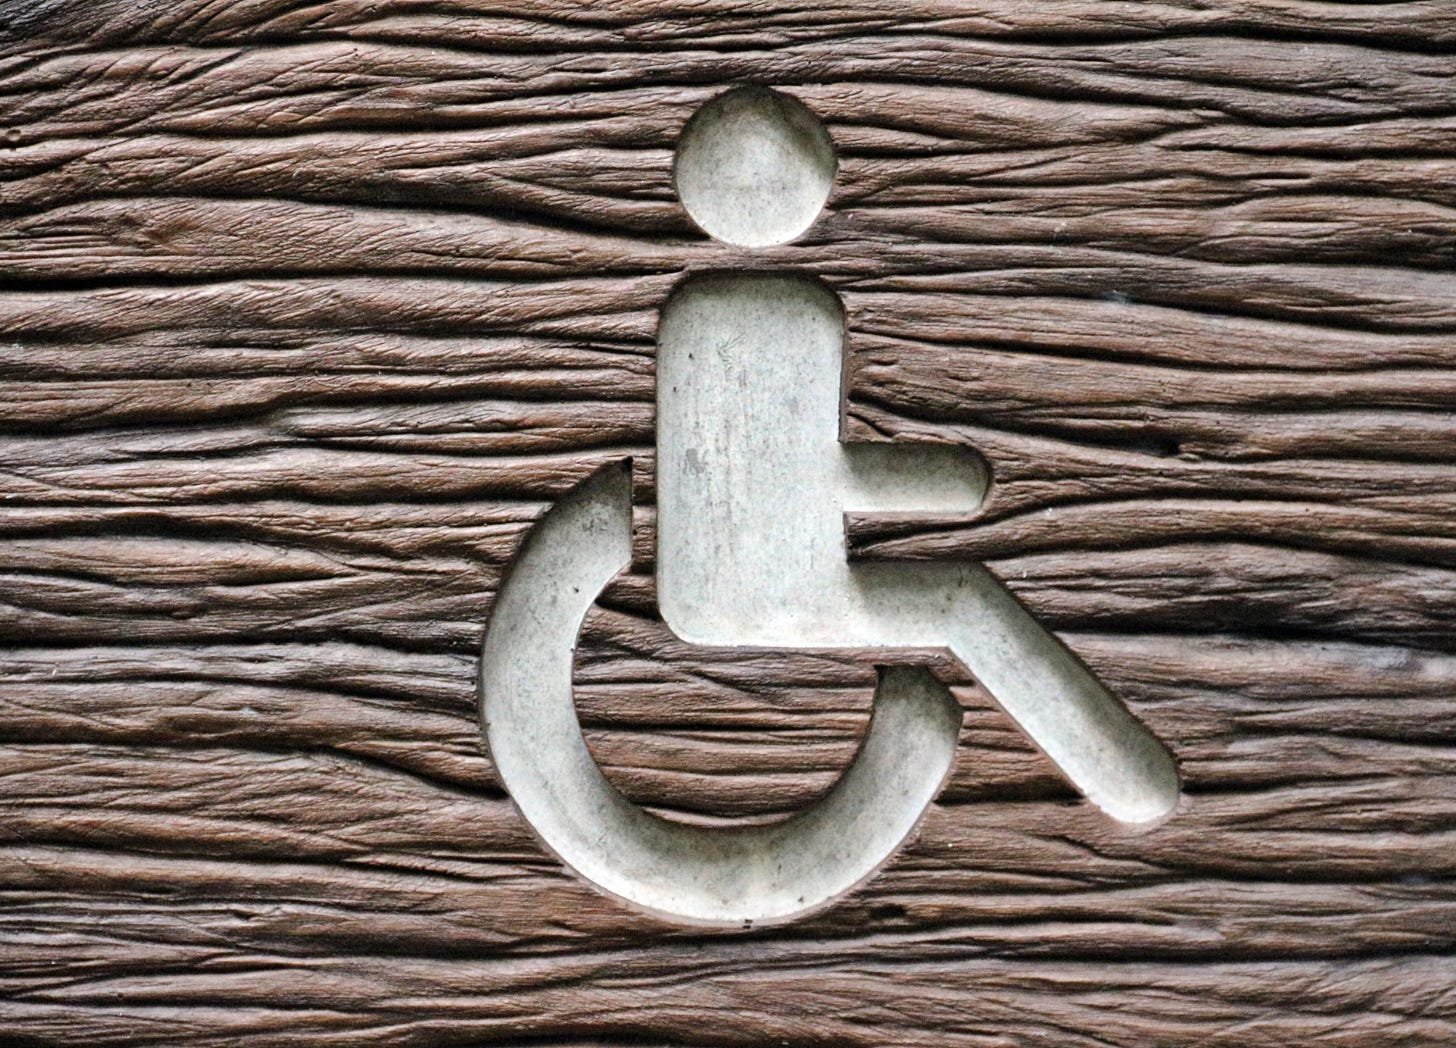 Wheelchair symbol carved into textured wood